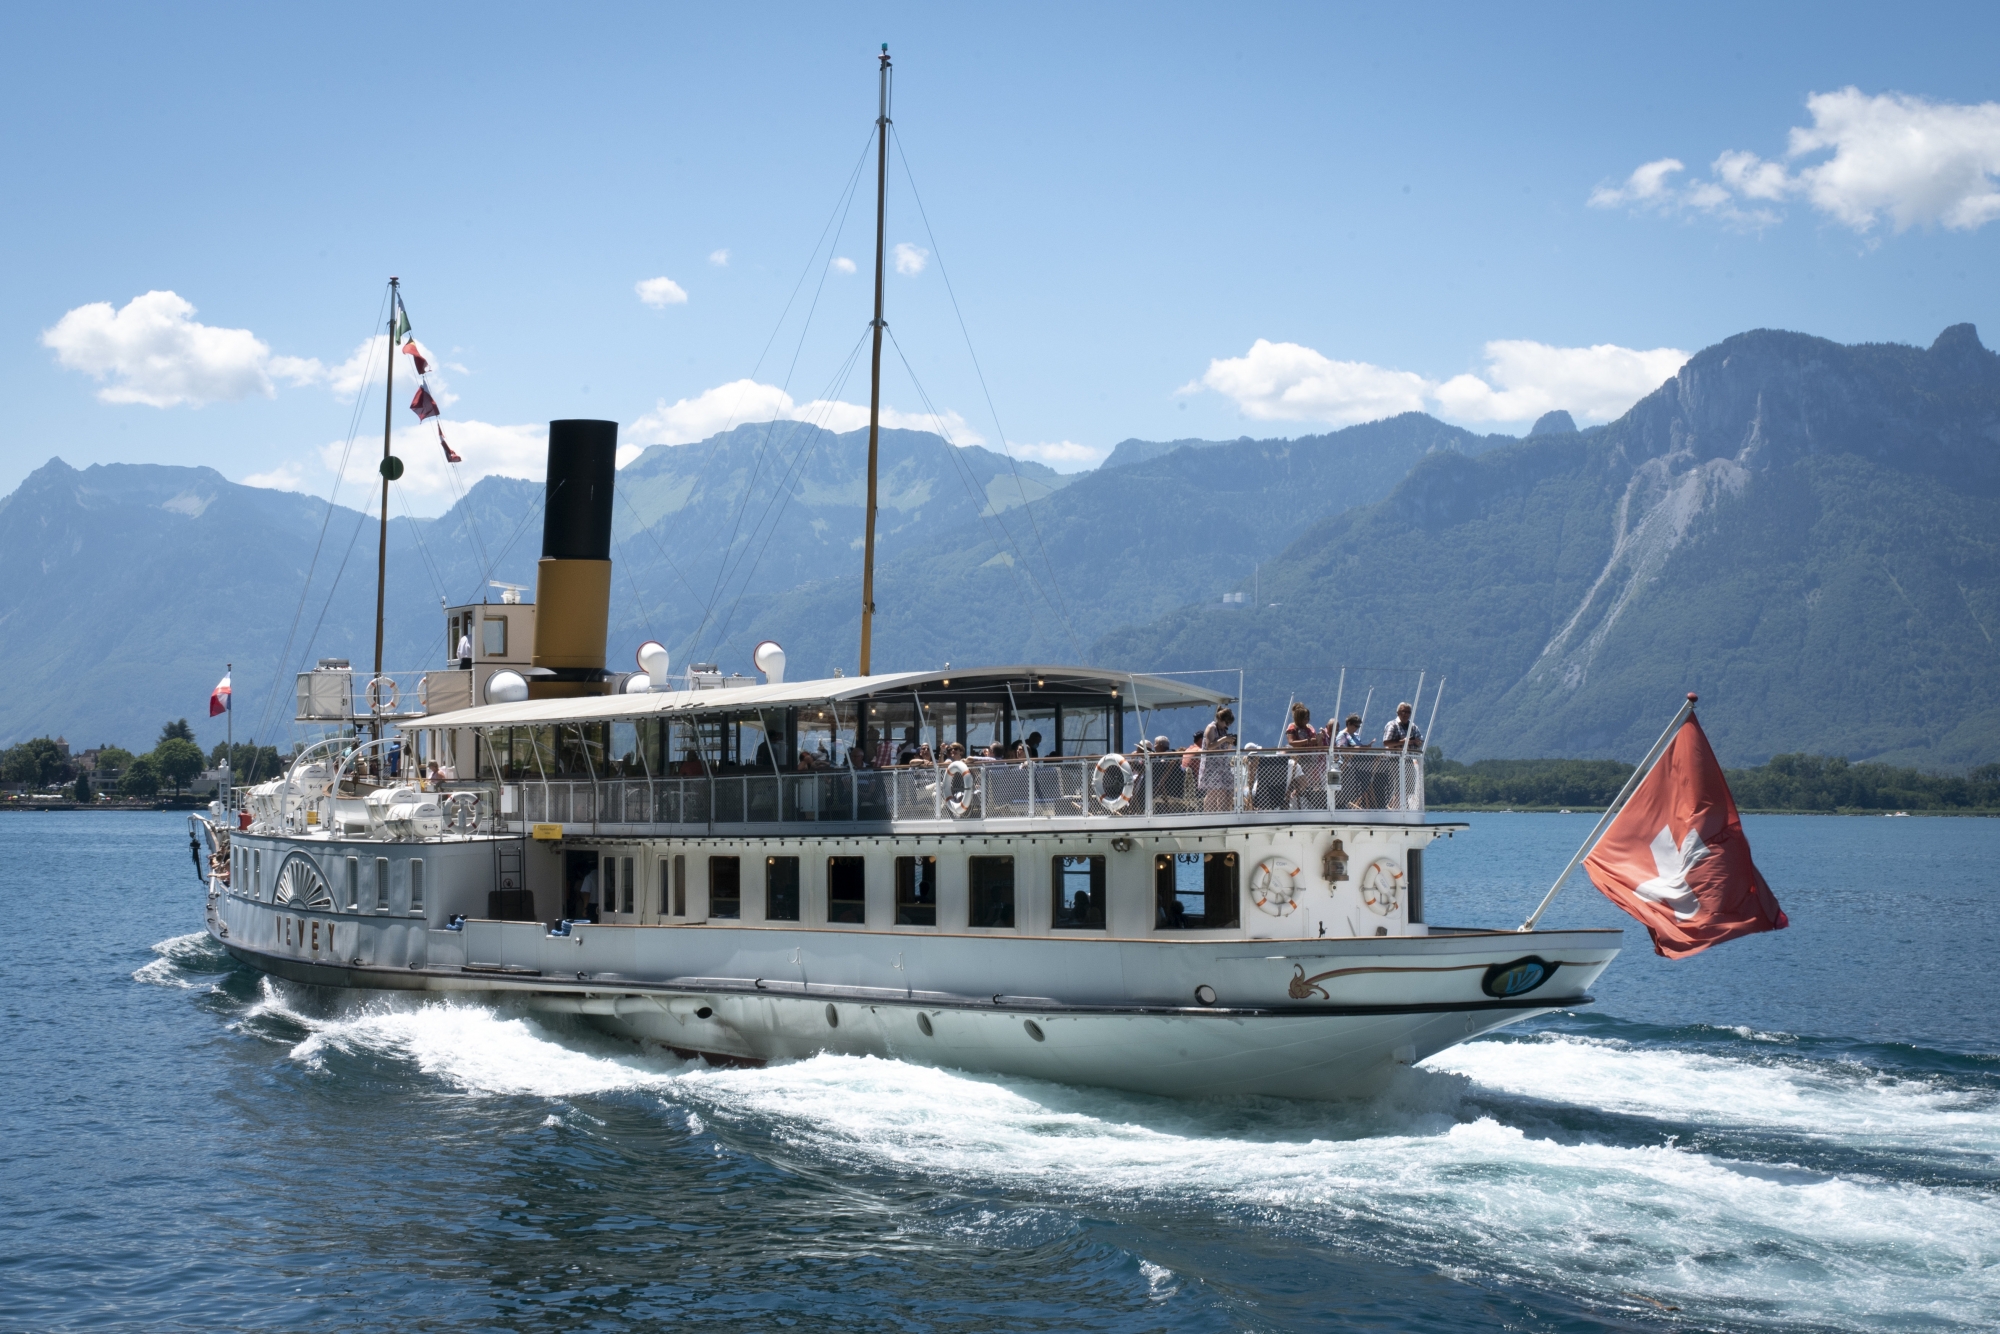 The steamboat Vevey, CGN, sails on the Lake Geneva close to the Chillon Castle (Chateau de Chillon) during the coronavirus disease (COVID-19) outbreak, in Veytaux near Montreux, Switzerland, Sunday, July 5, 2020. (KEYSTONE/Marcel Gillieron)
ArcInfo